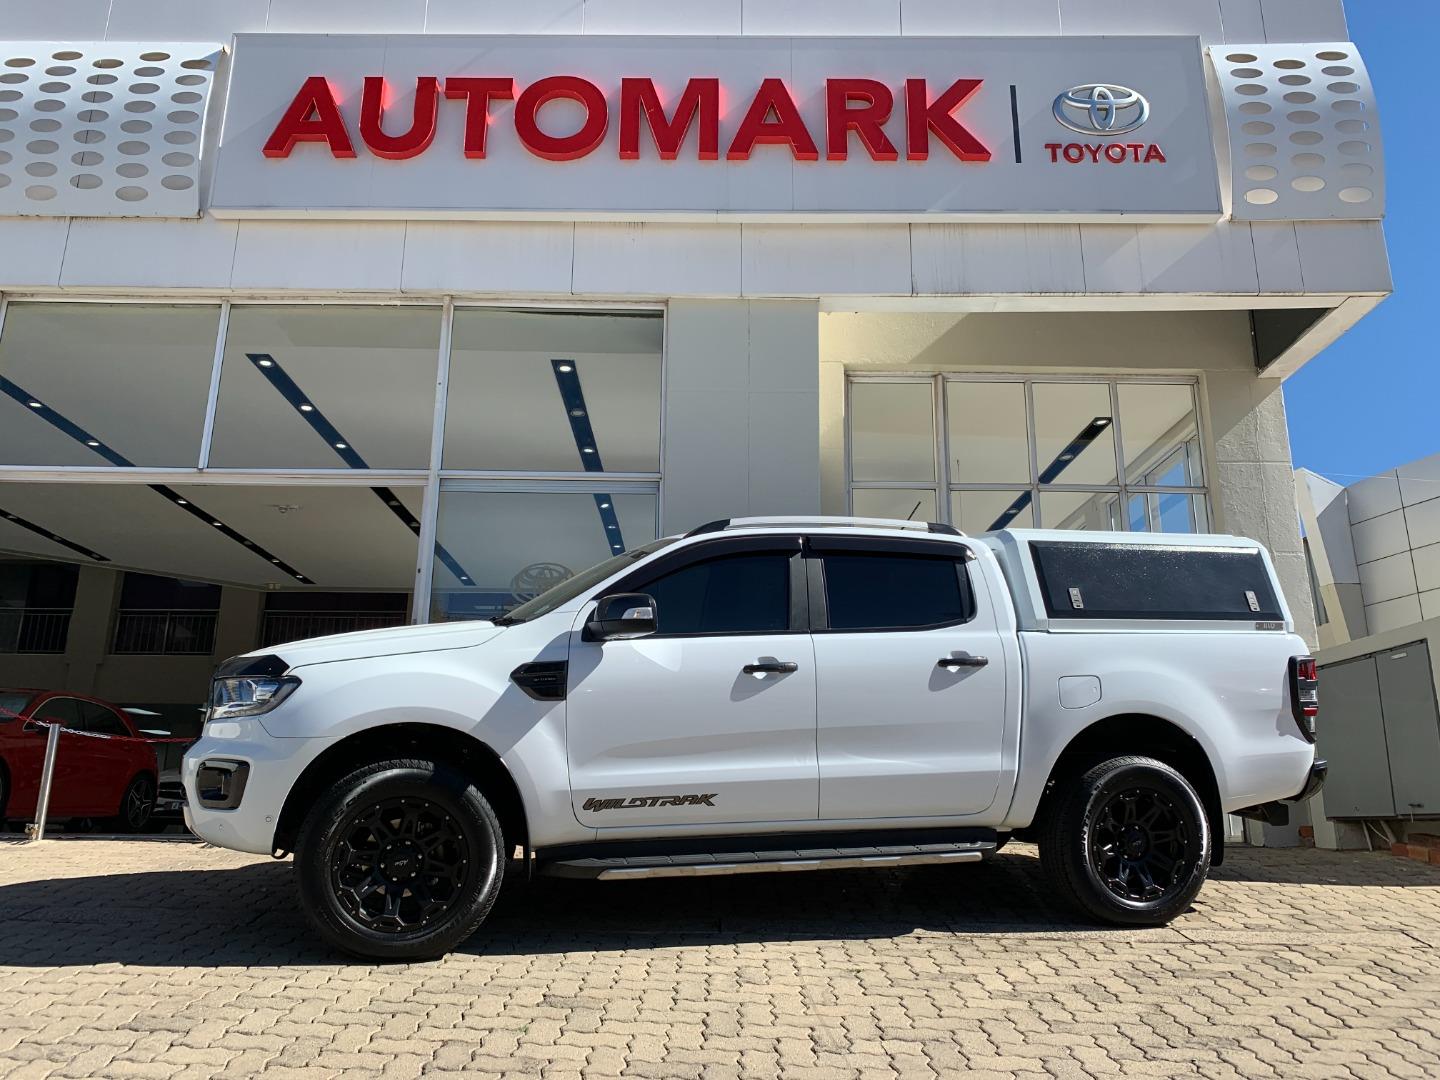 2020 Ford Ranger My20 2.0 Bit 4X2 D Cab Wildtrak At for sale - 342976